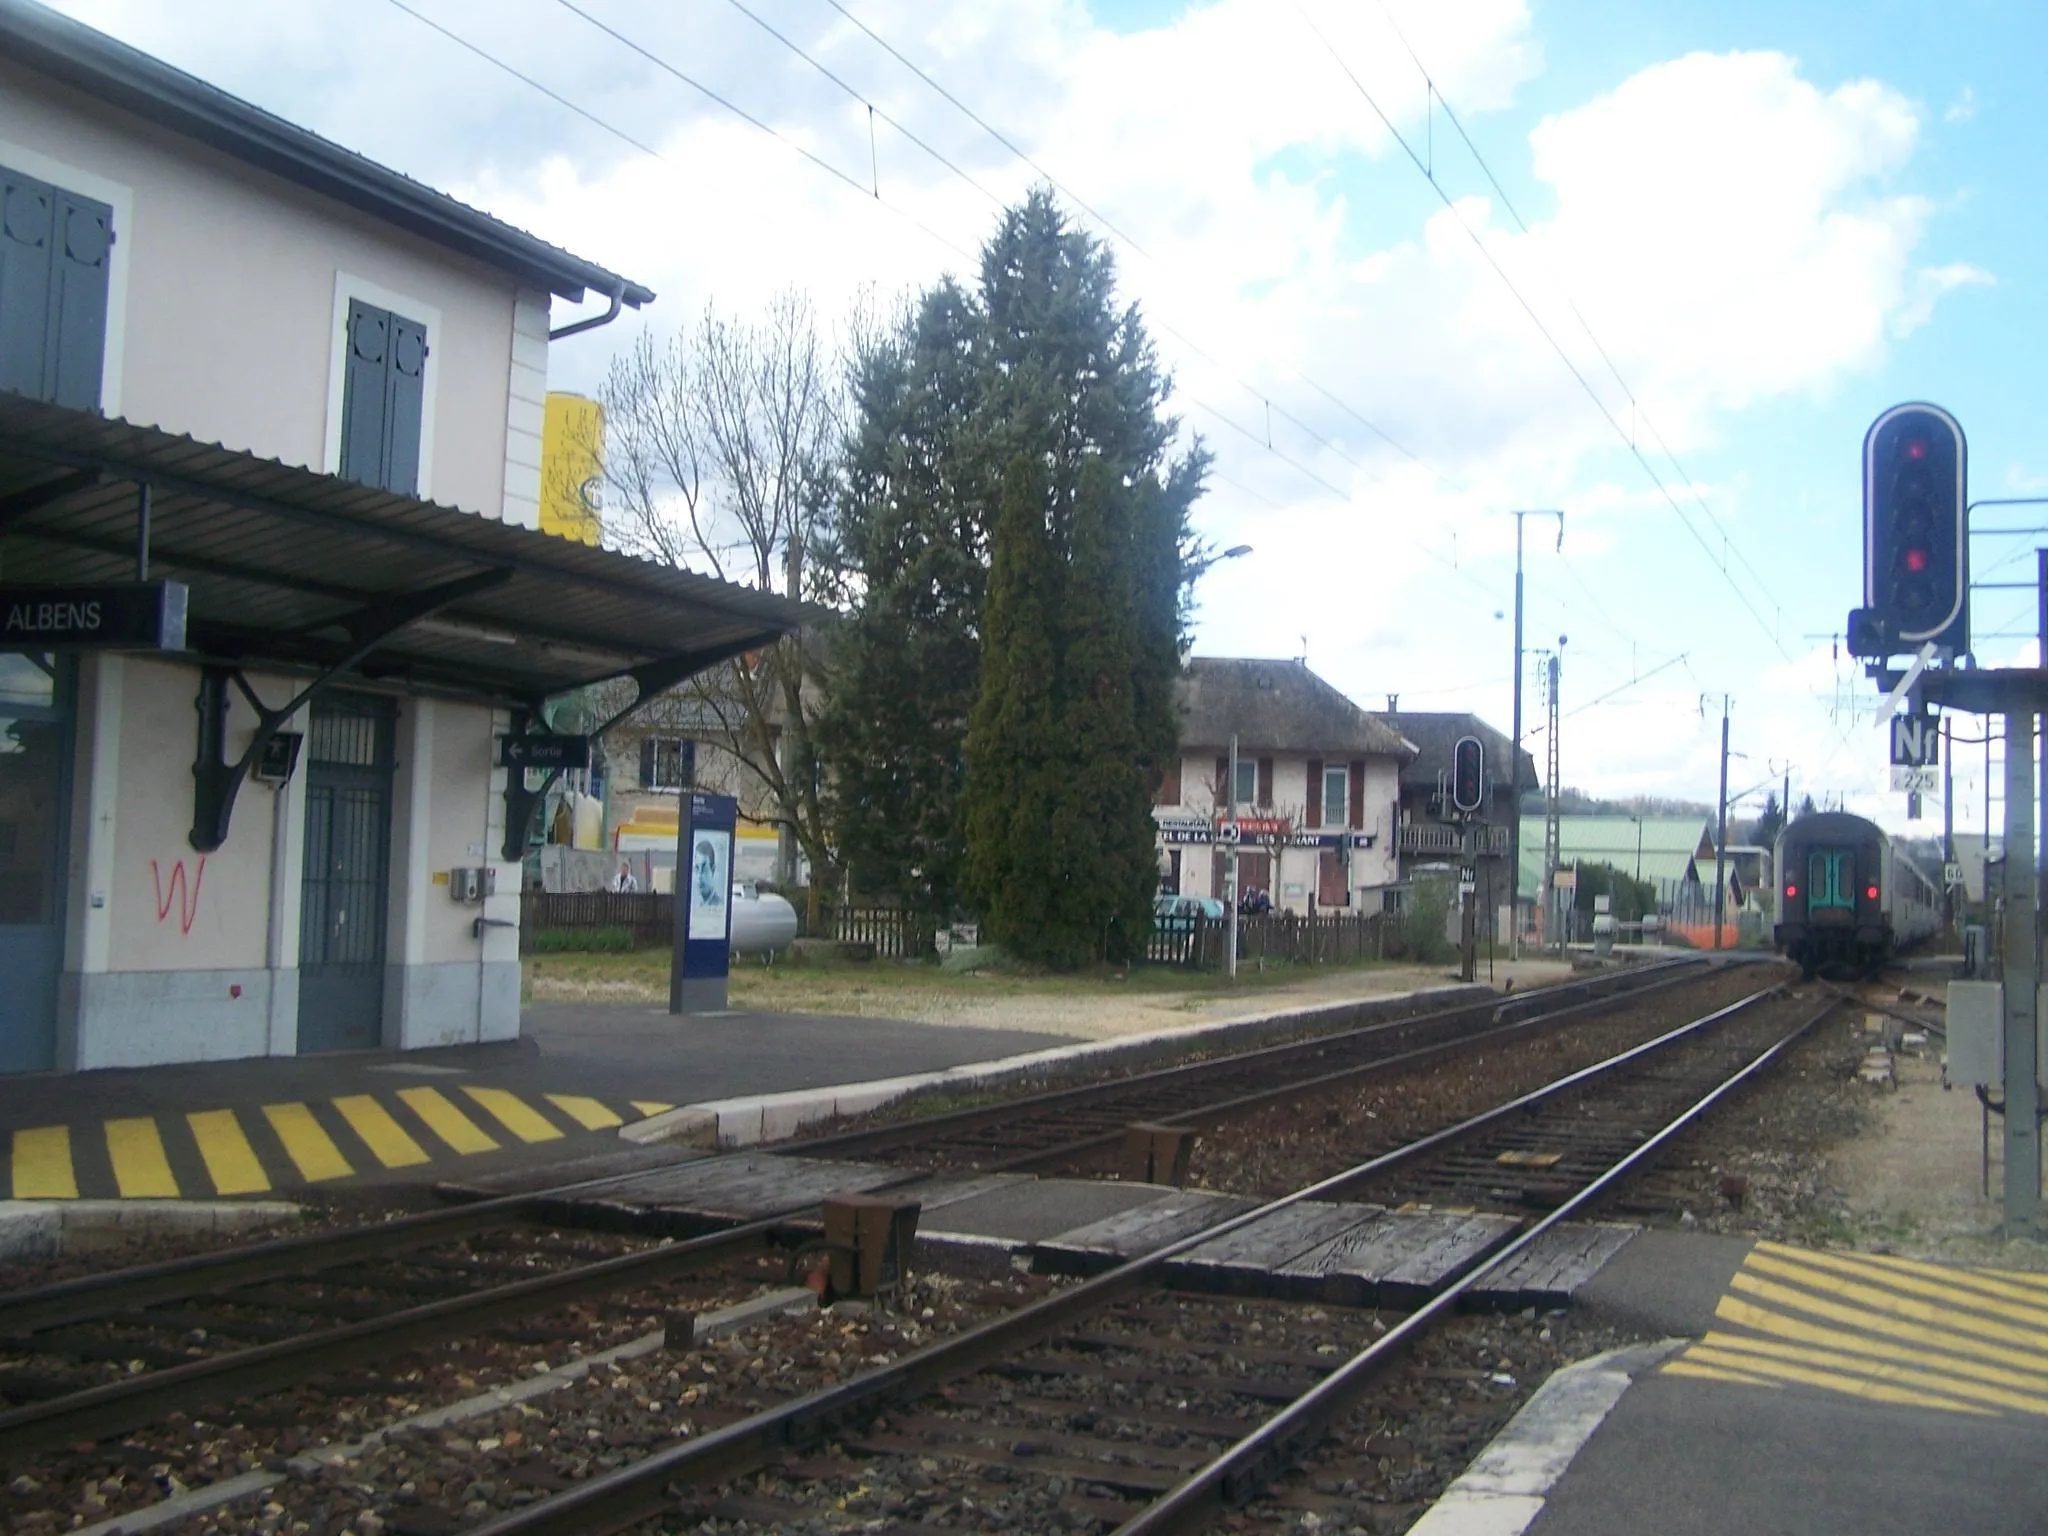 Photo showing: Tracks and platforms of the little station of Albens in Savoie, France (train moving to Annecy).